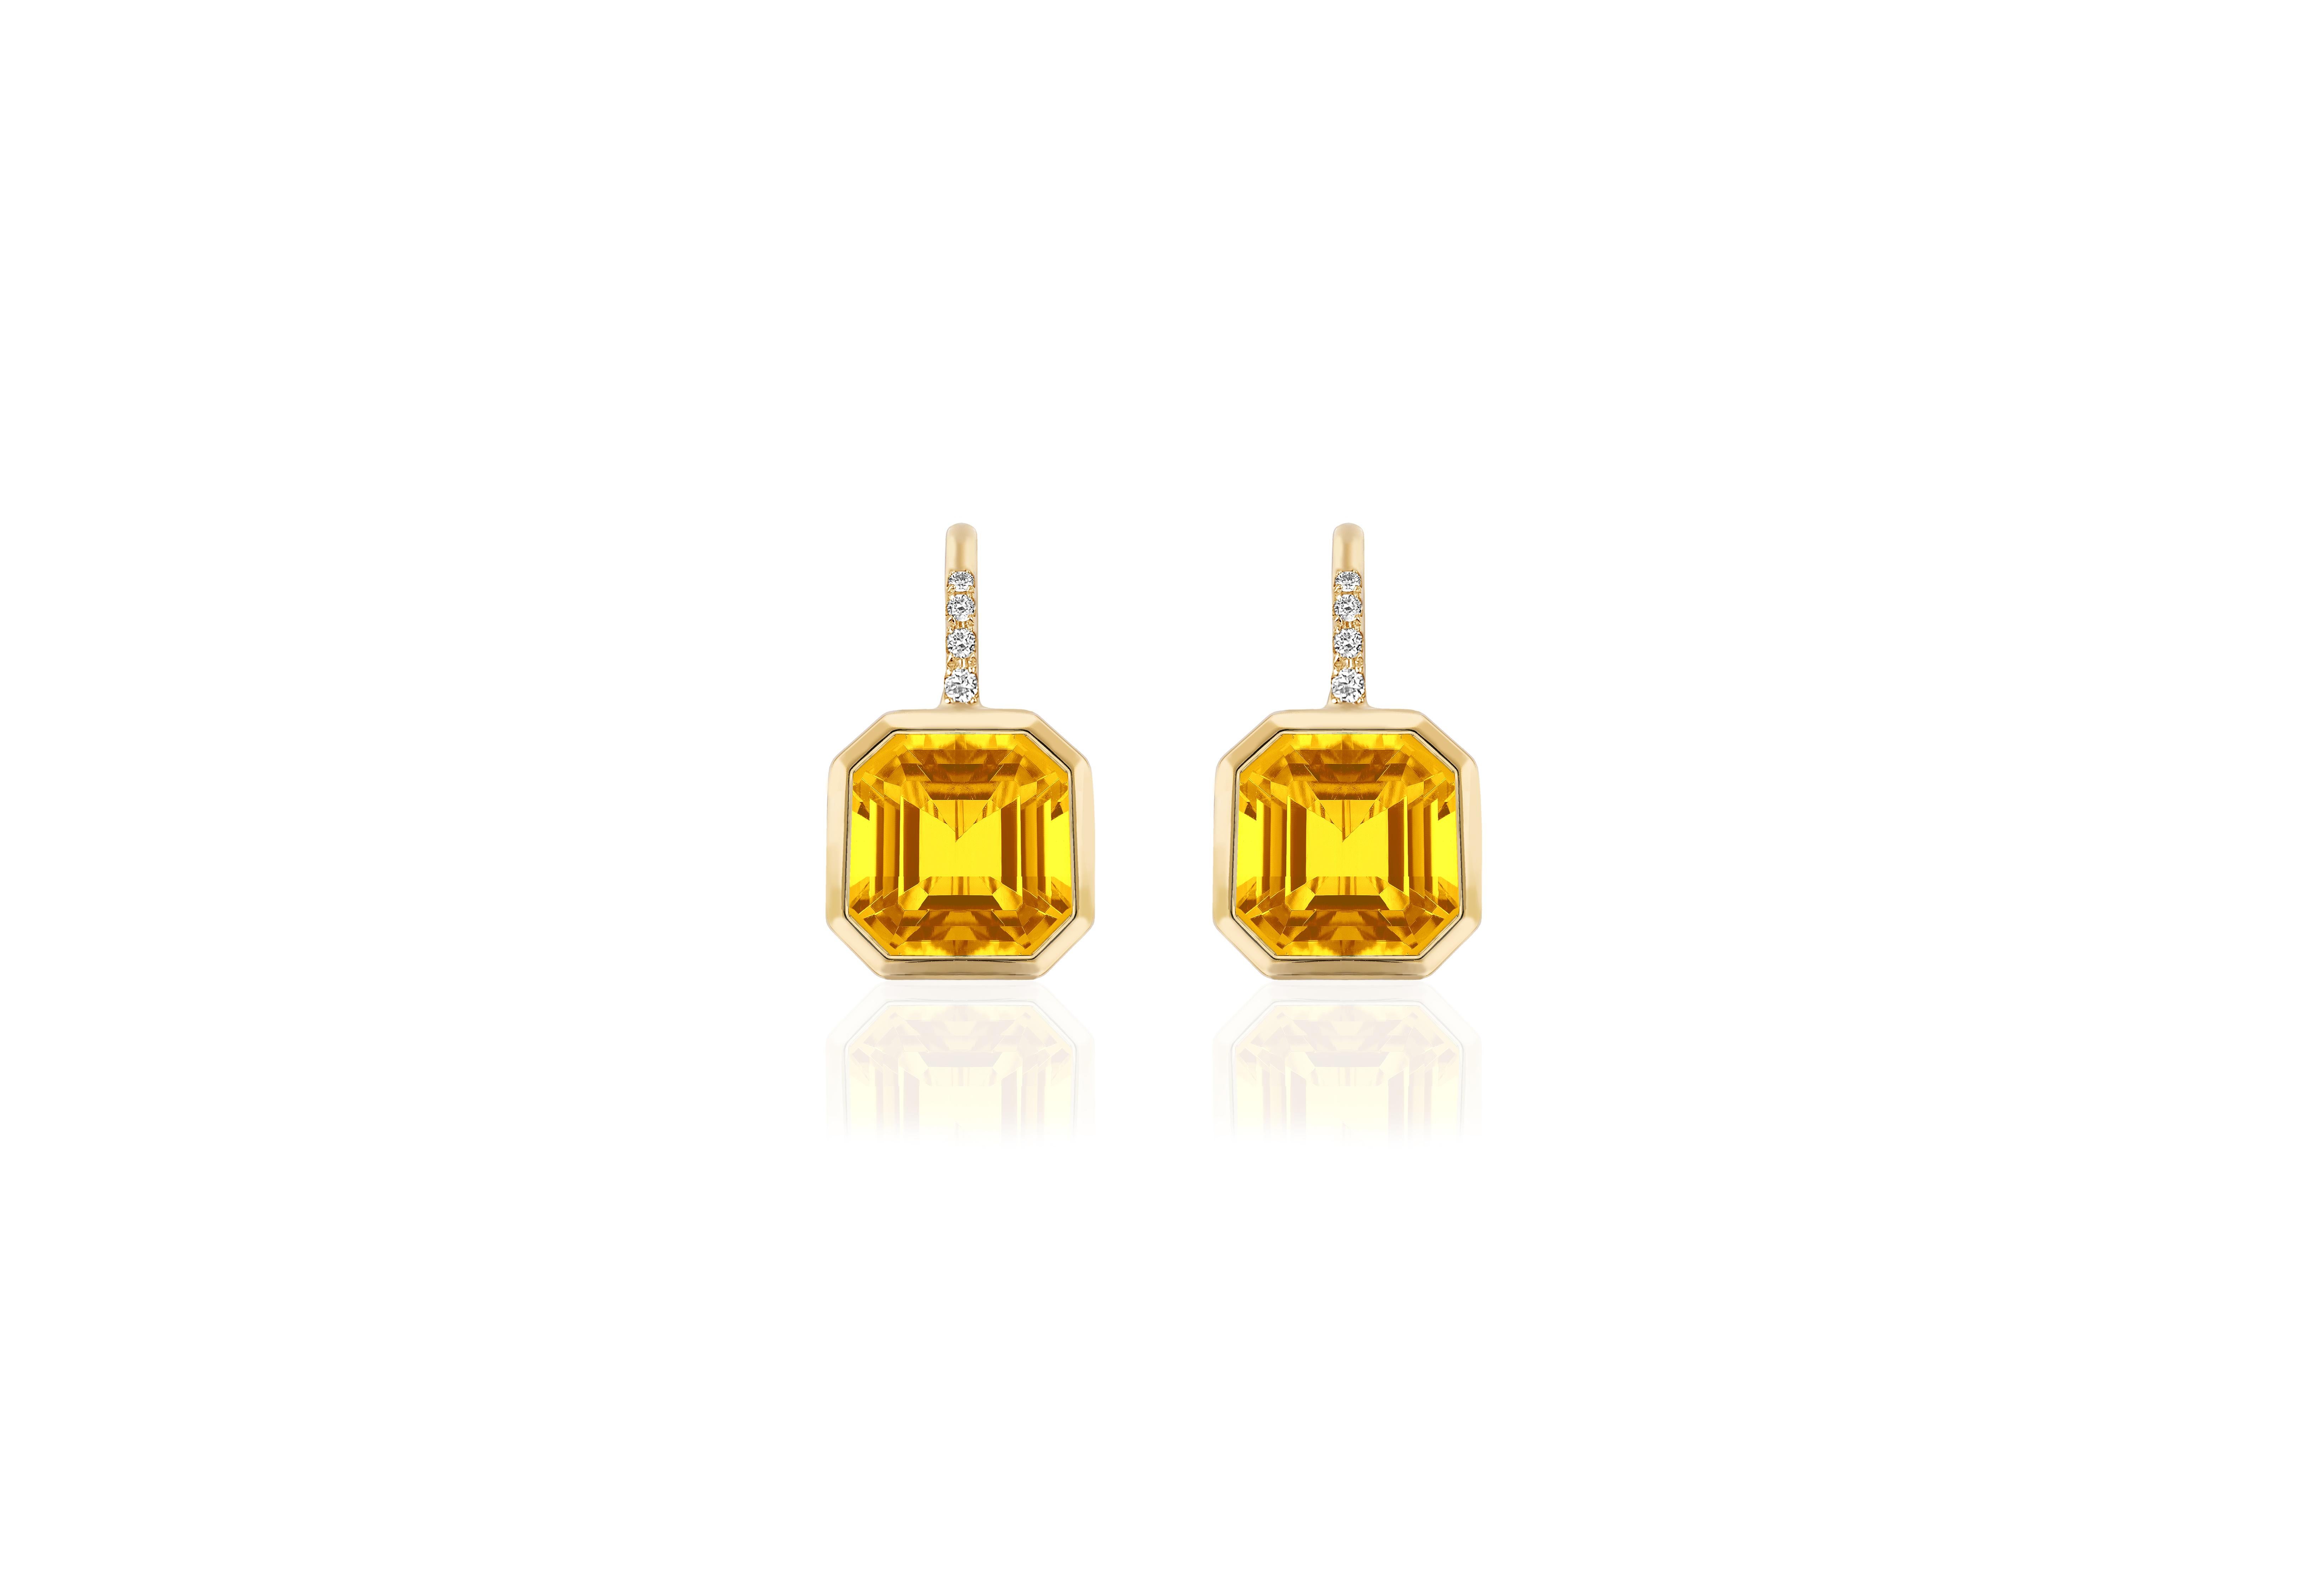 Elevate your style with these exquisite earrings featuring a stunning 9 x 9 mm Asscher-cut Citrine gemstone. Expertly set on a delicate wire of 18K Gold, these earrings are adorned with four dazzling Diamonds, adding a touch of luxury and sparkle to